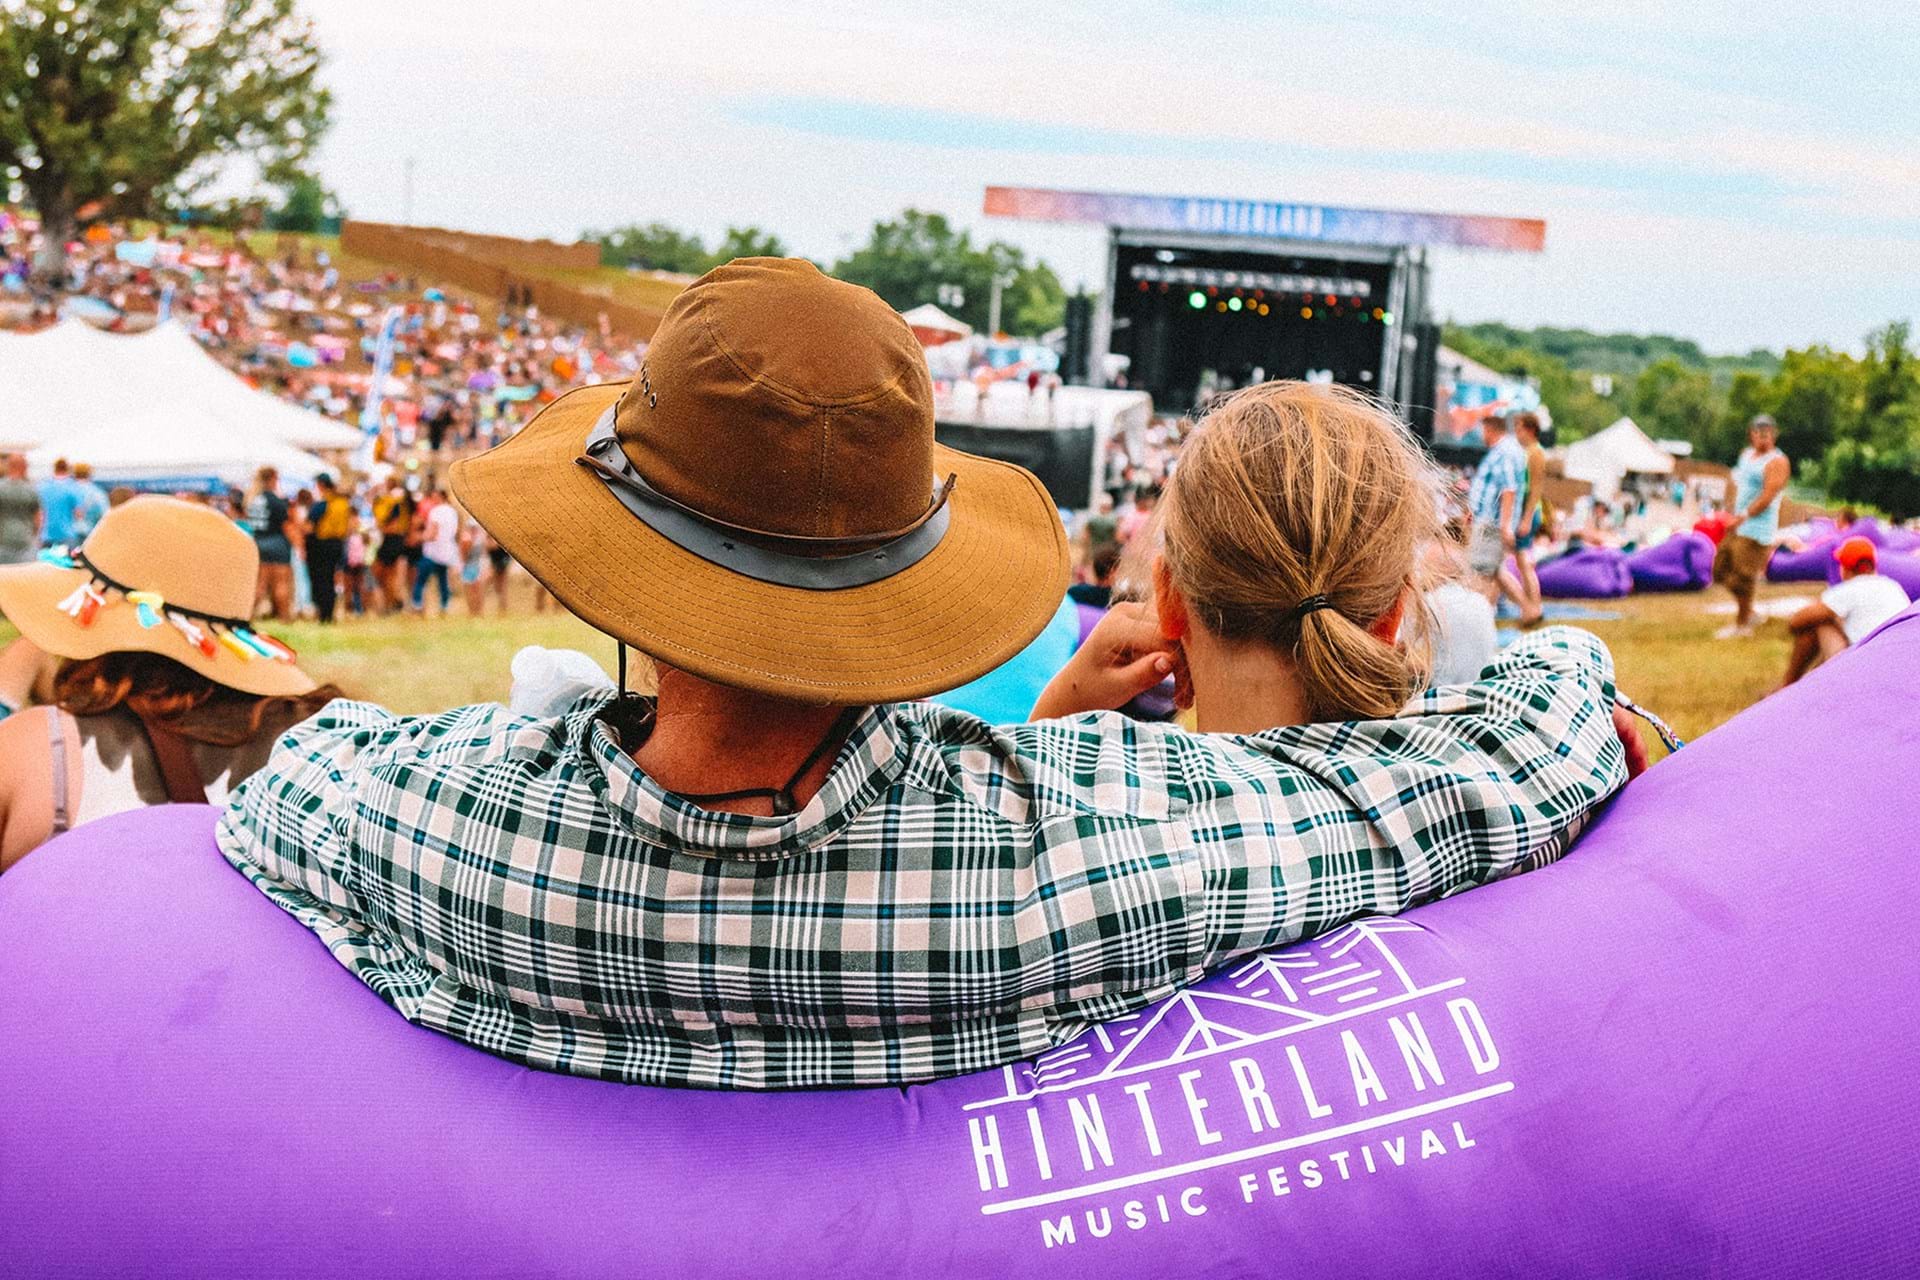 Home to the Hinterland Music Festival